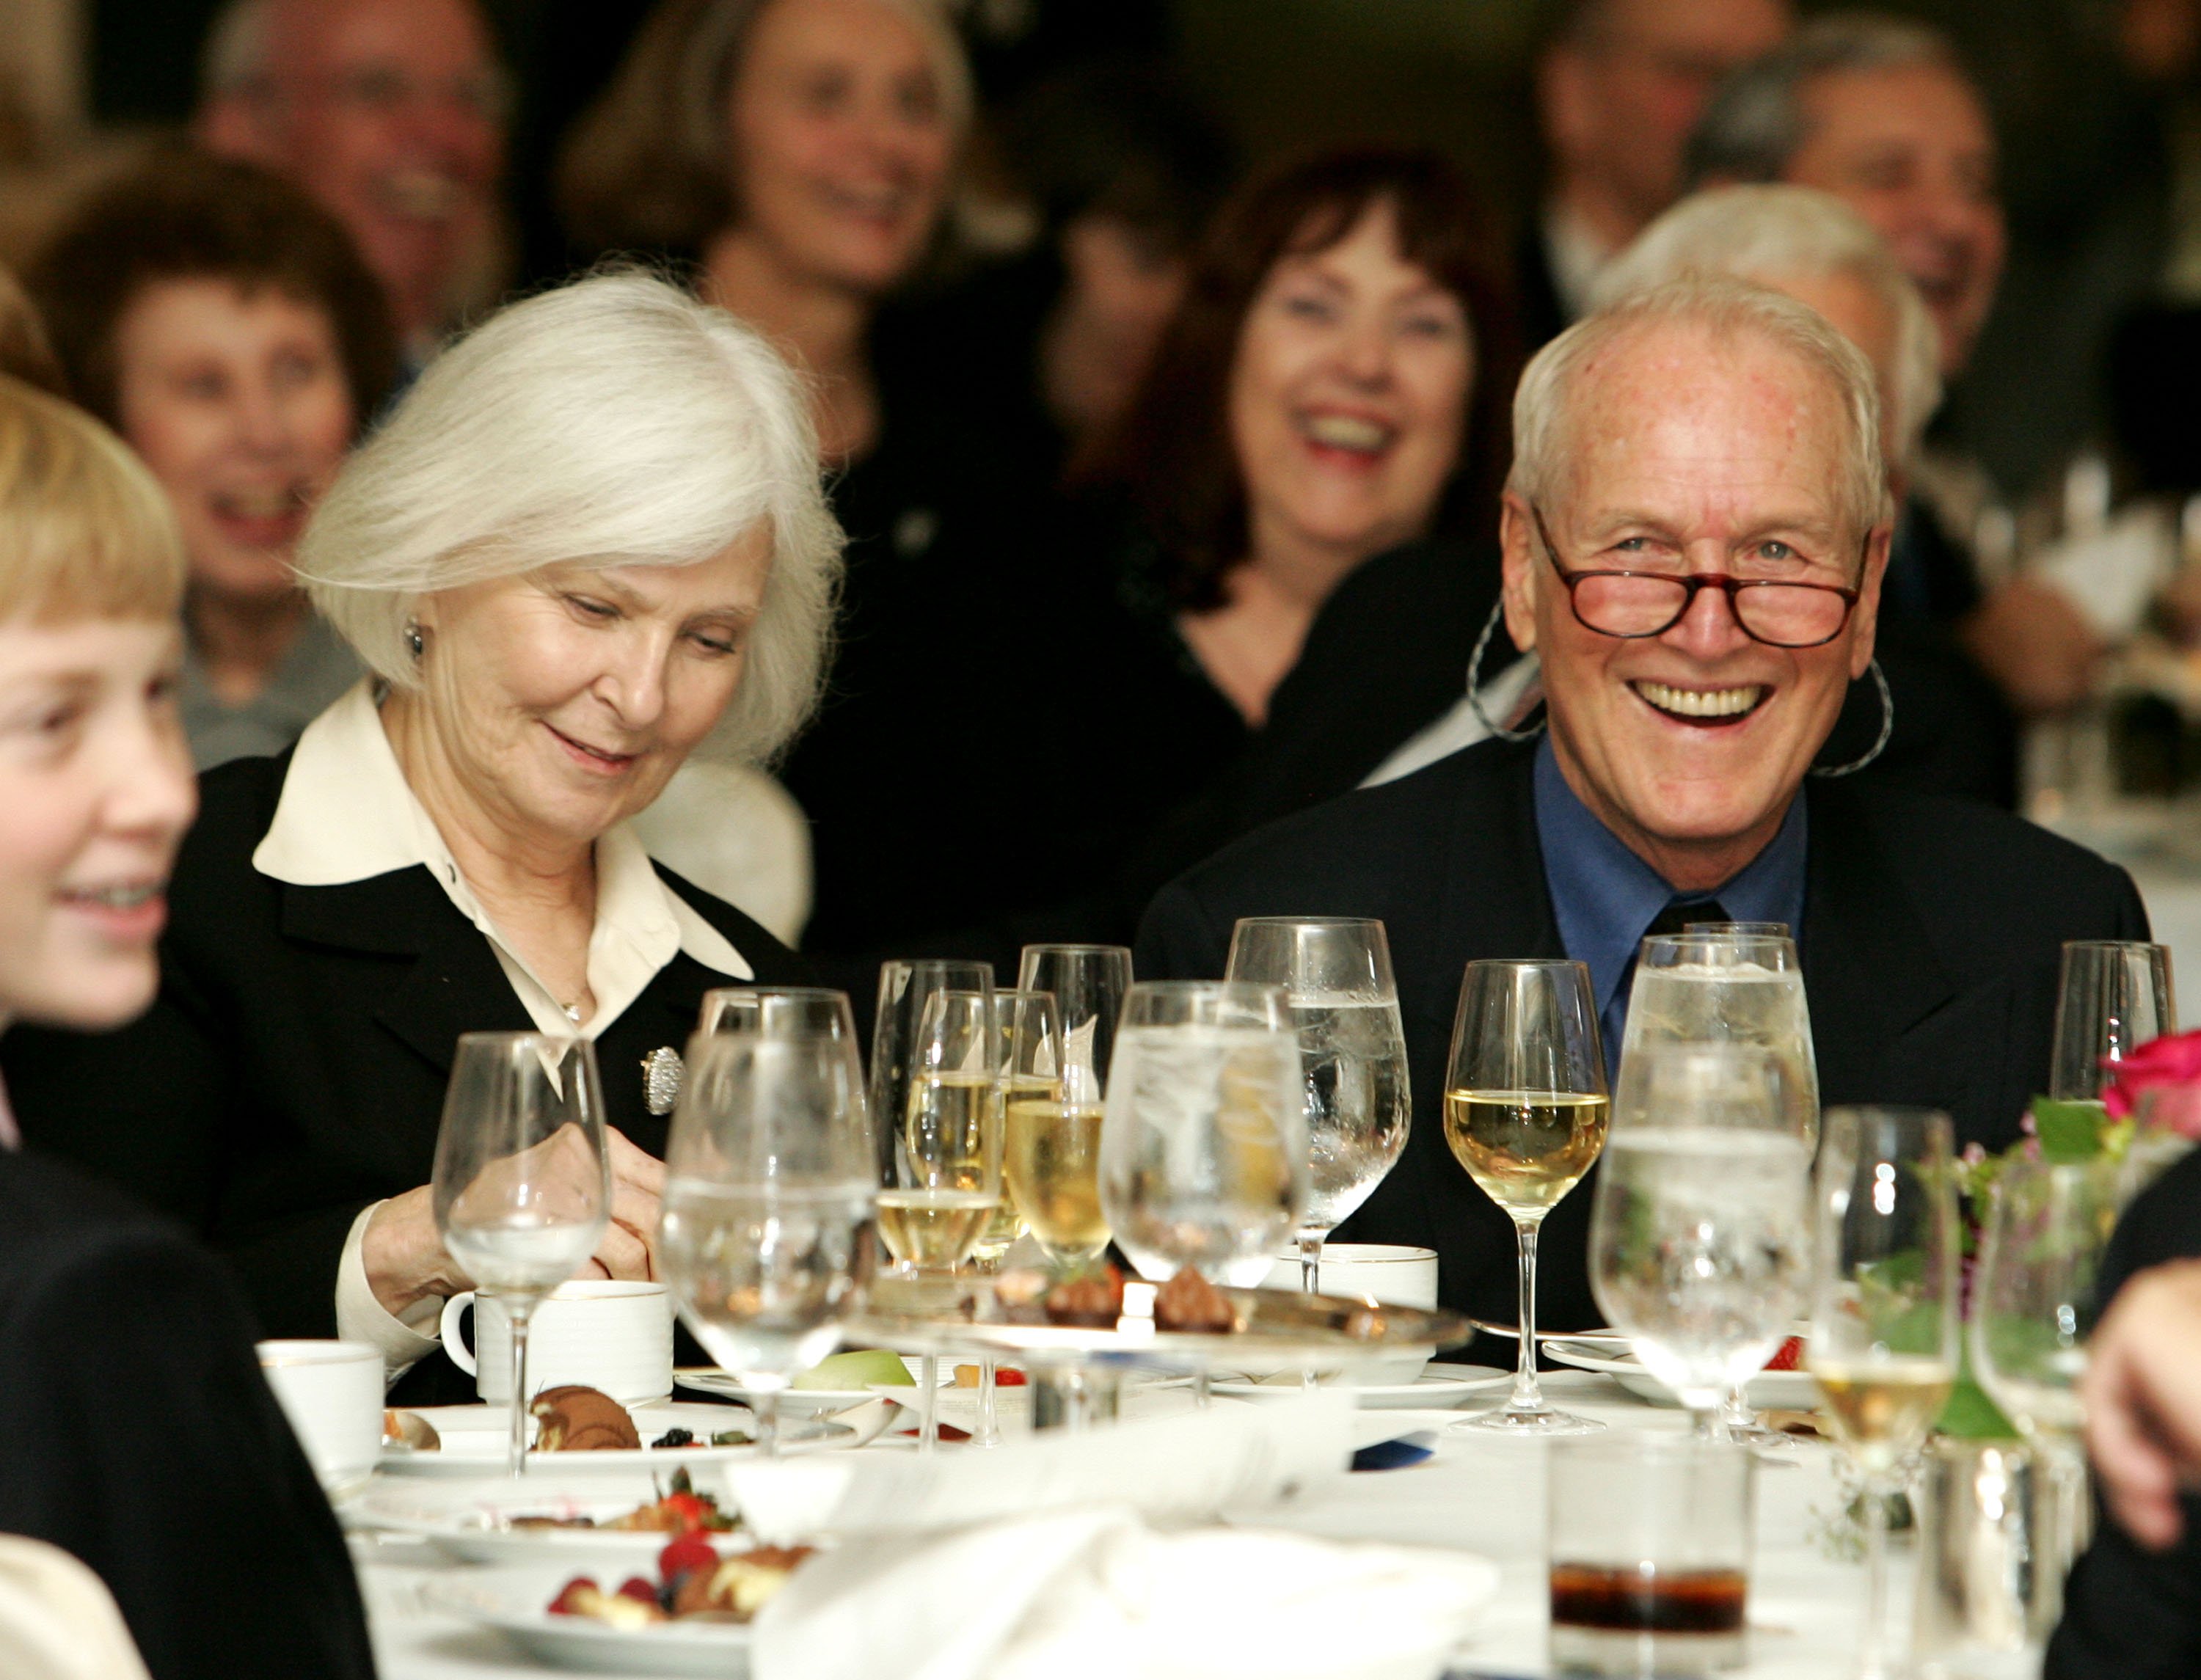 Joanne Woodward and Paul Newman during The Second Annual Barretstown New York City Gala on October 19, 2005 | Source: Getty Images